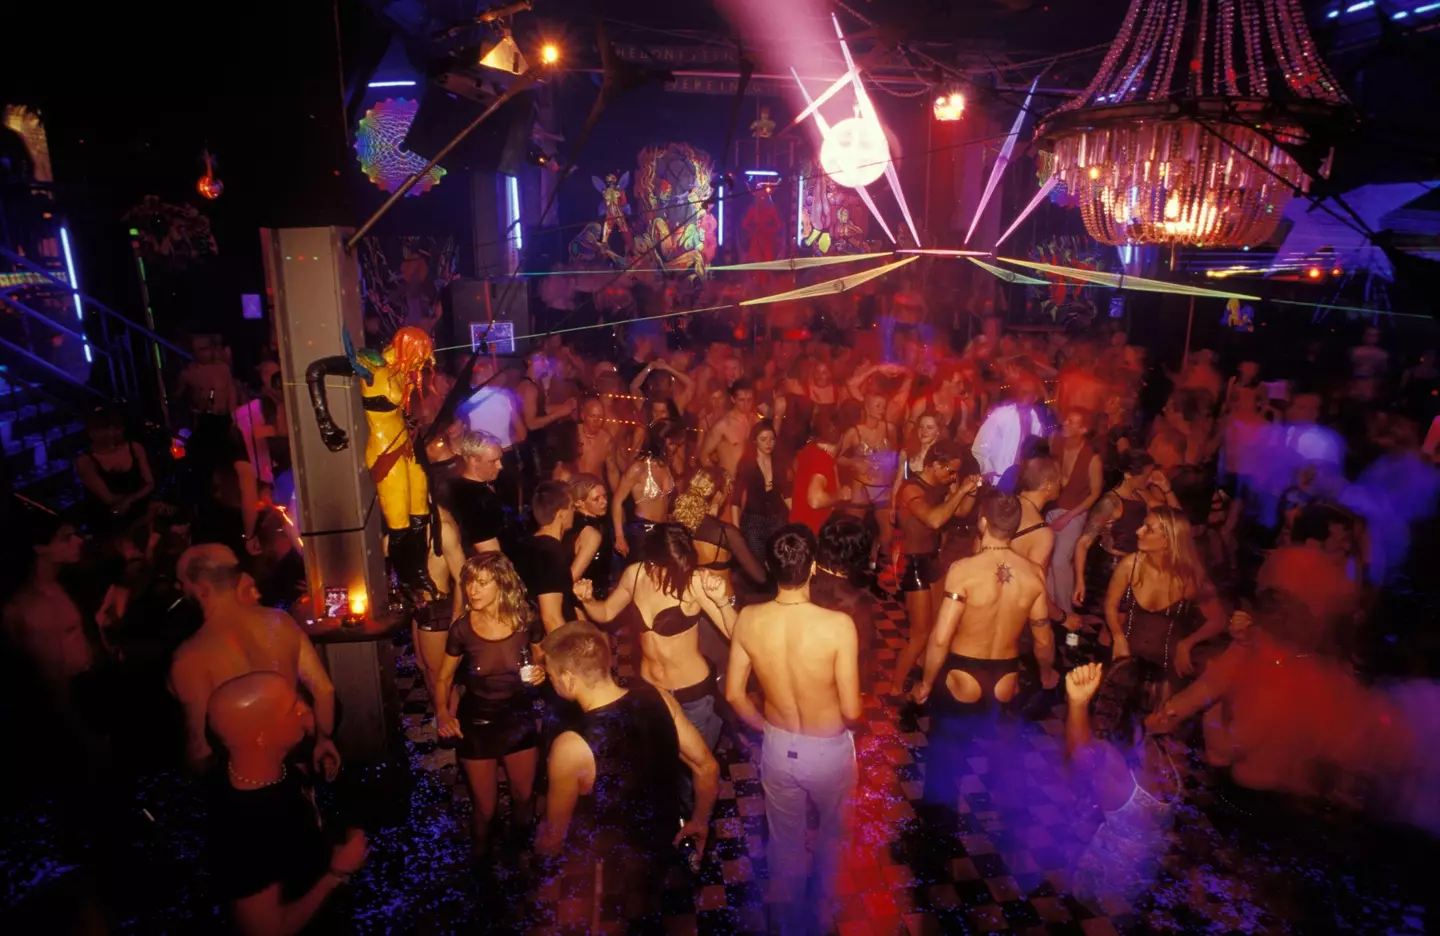 The club enforces strict rules, including a 'dress code' and an 'undress code'.